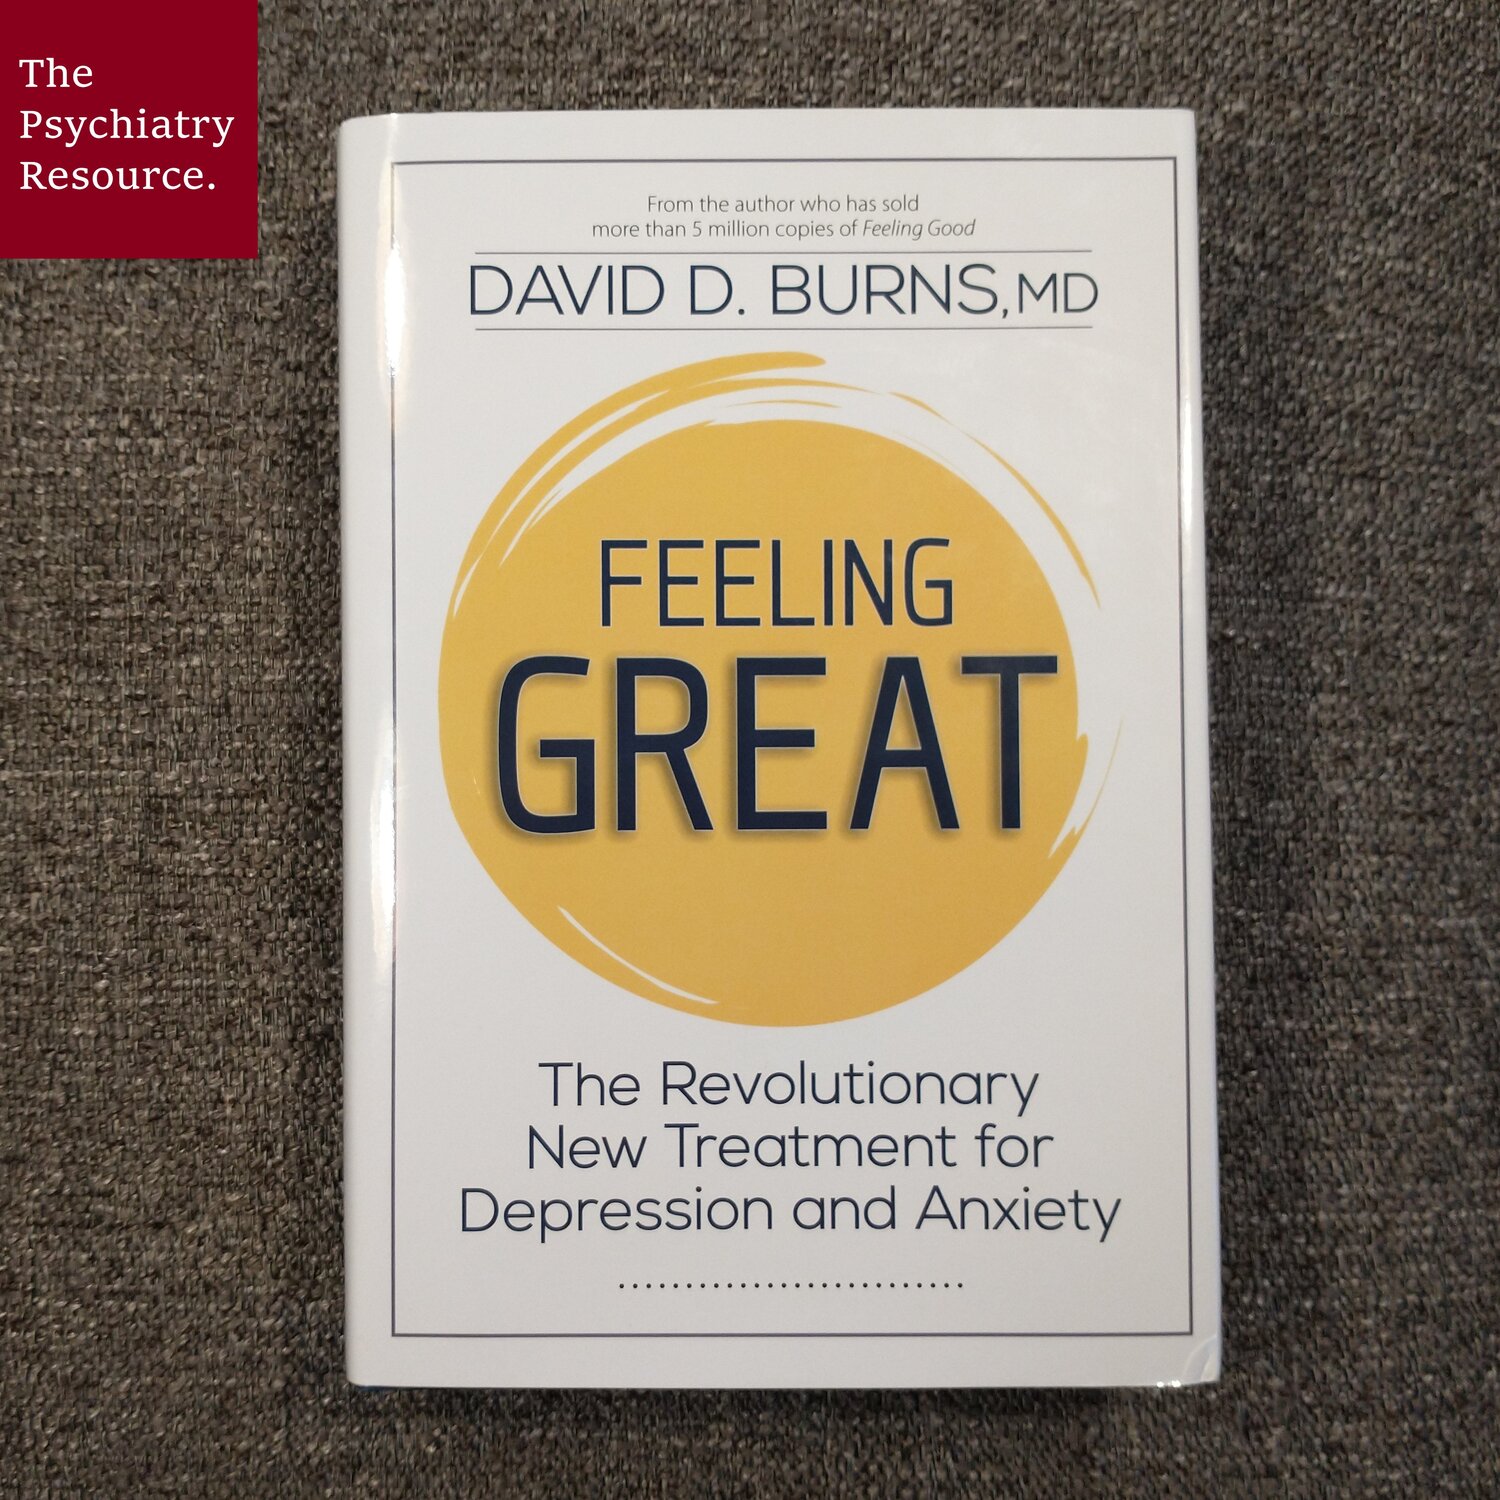 Book Review – Feeling Great — The Psychiatry Resource